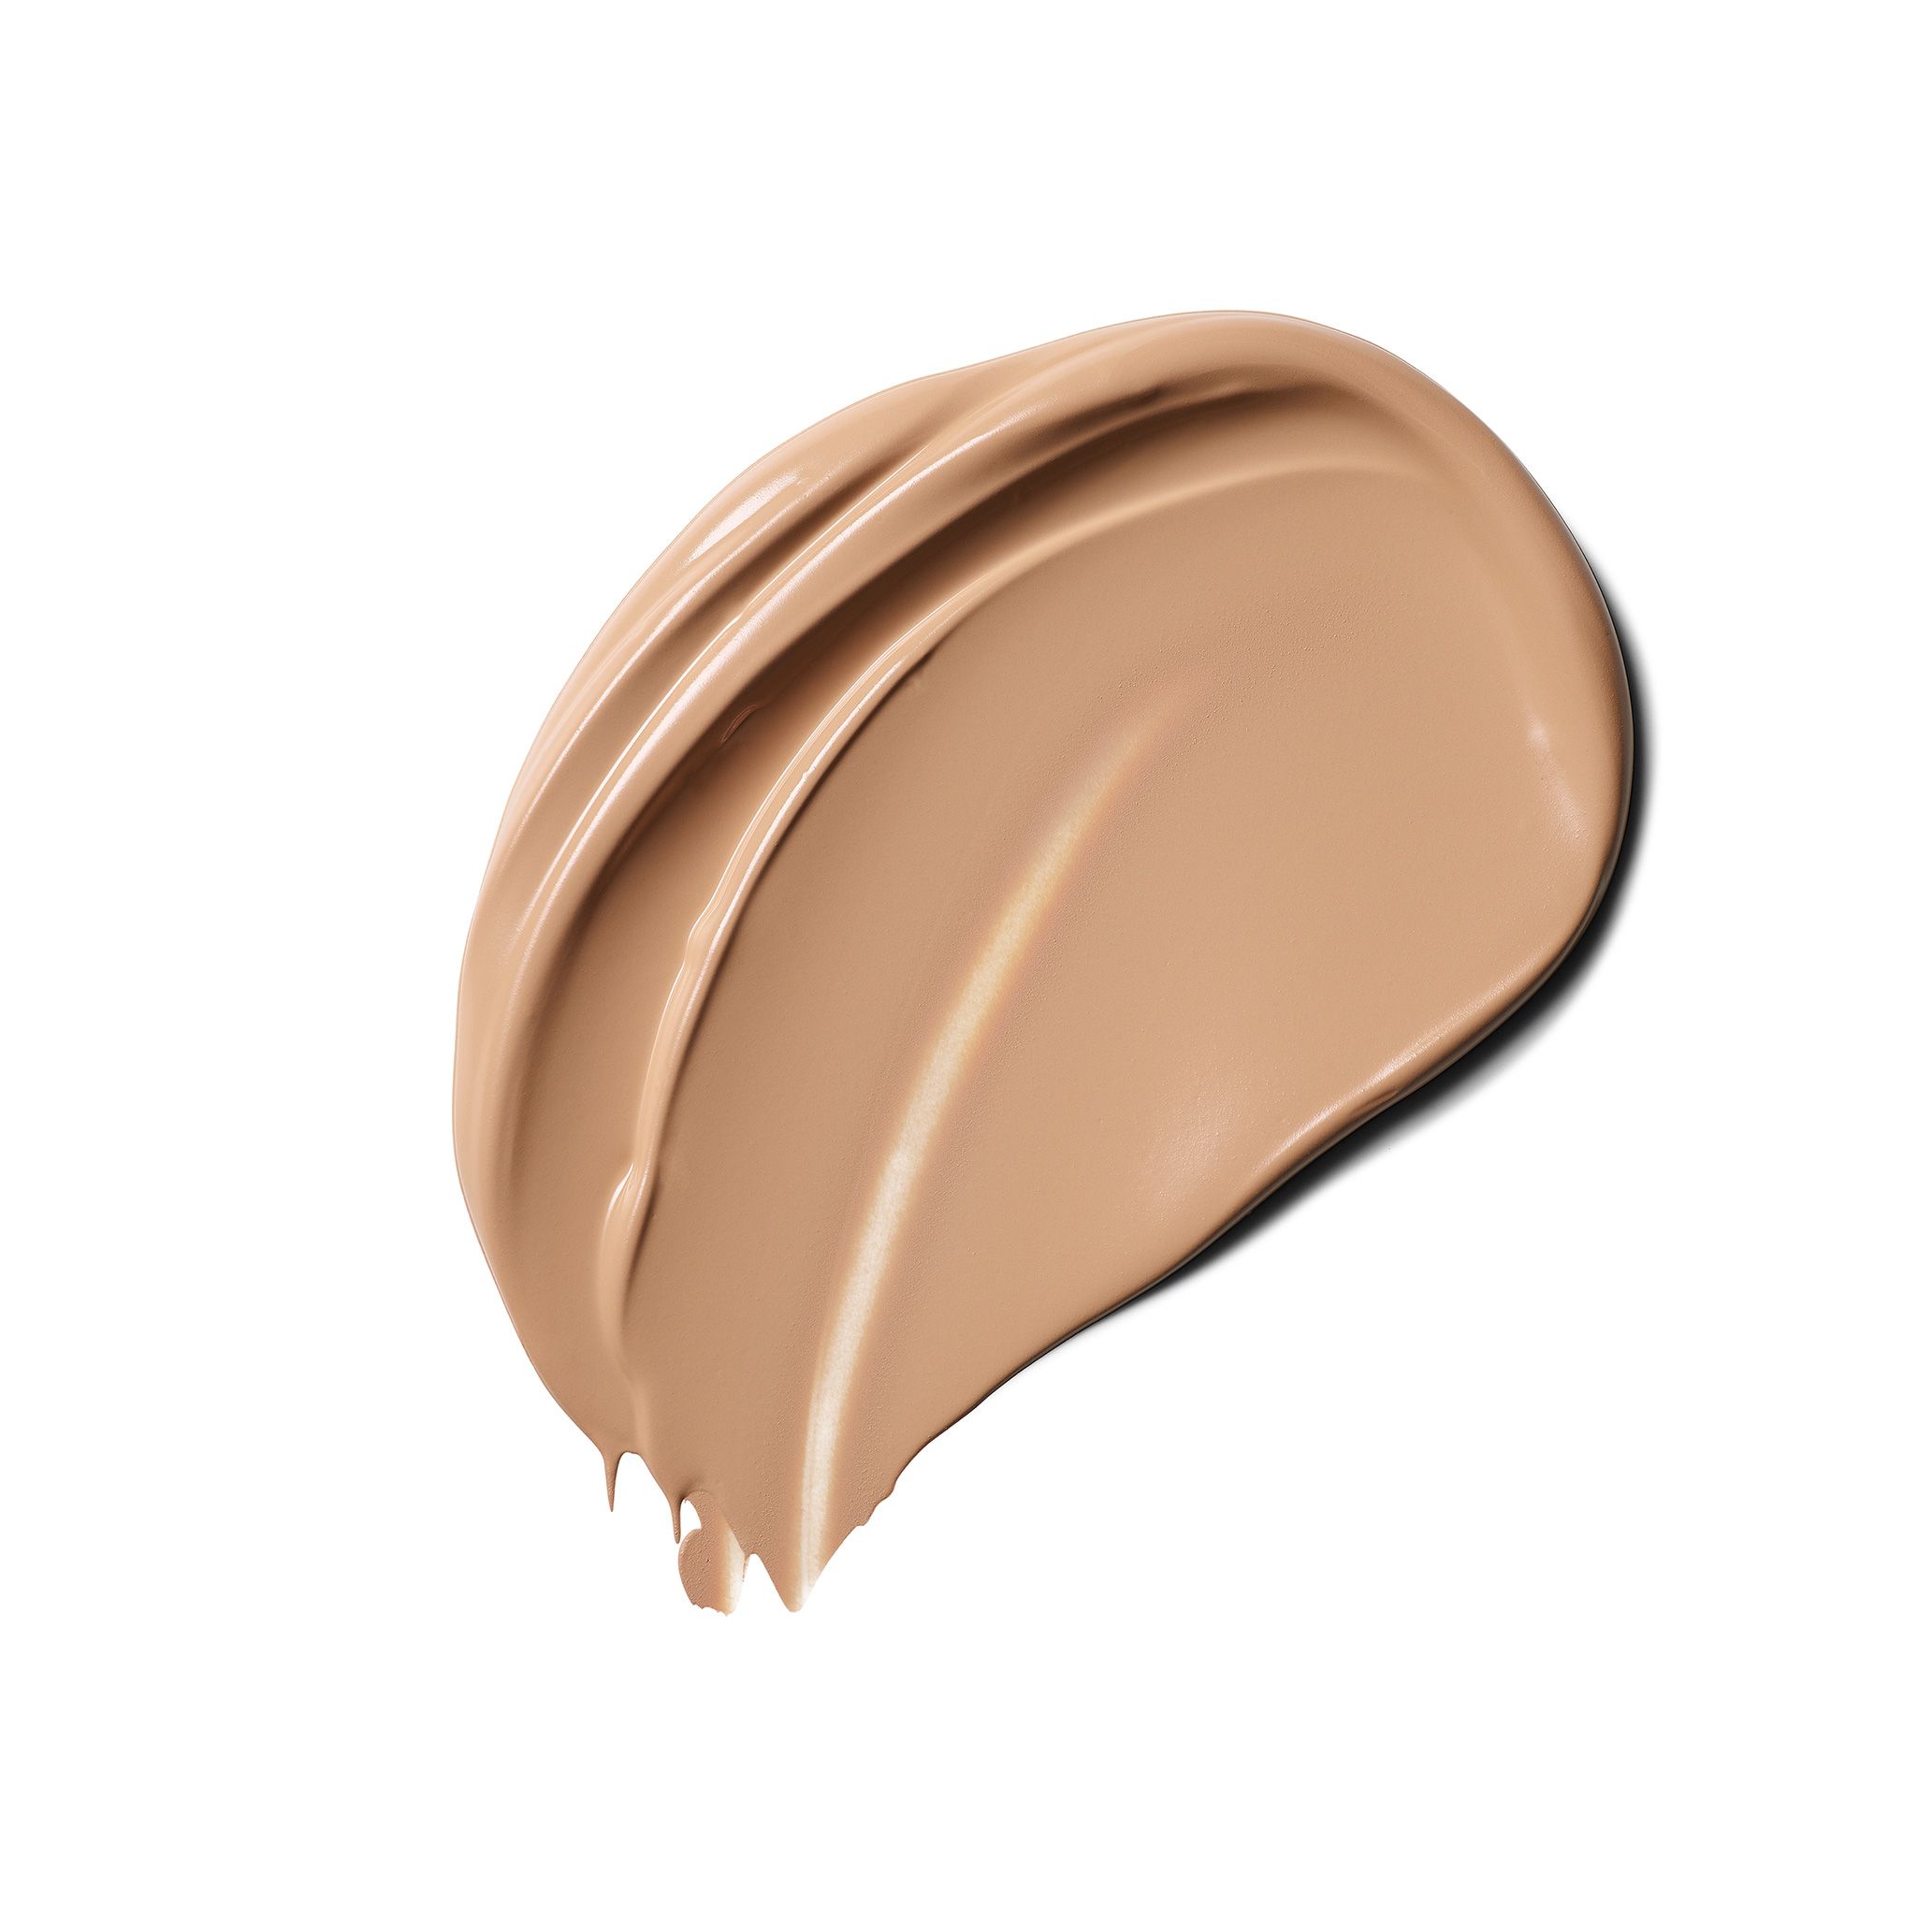 Estée Lauder Double Wear Maximium Cover Camouflage Foundation For Face and Body SPF 15, 3N1 Ivory Beige 2